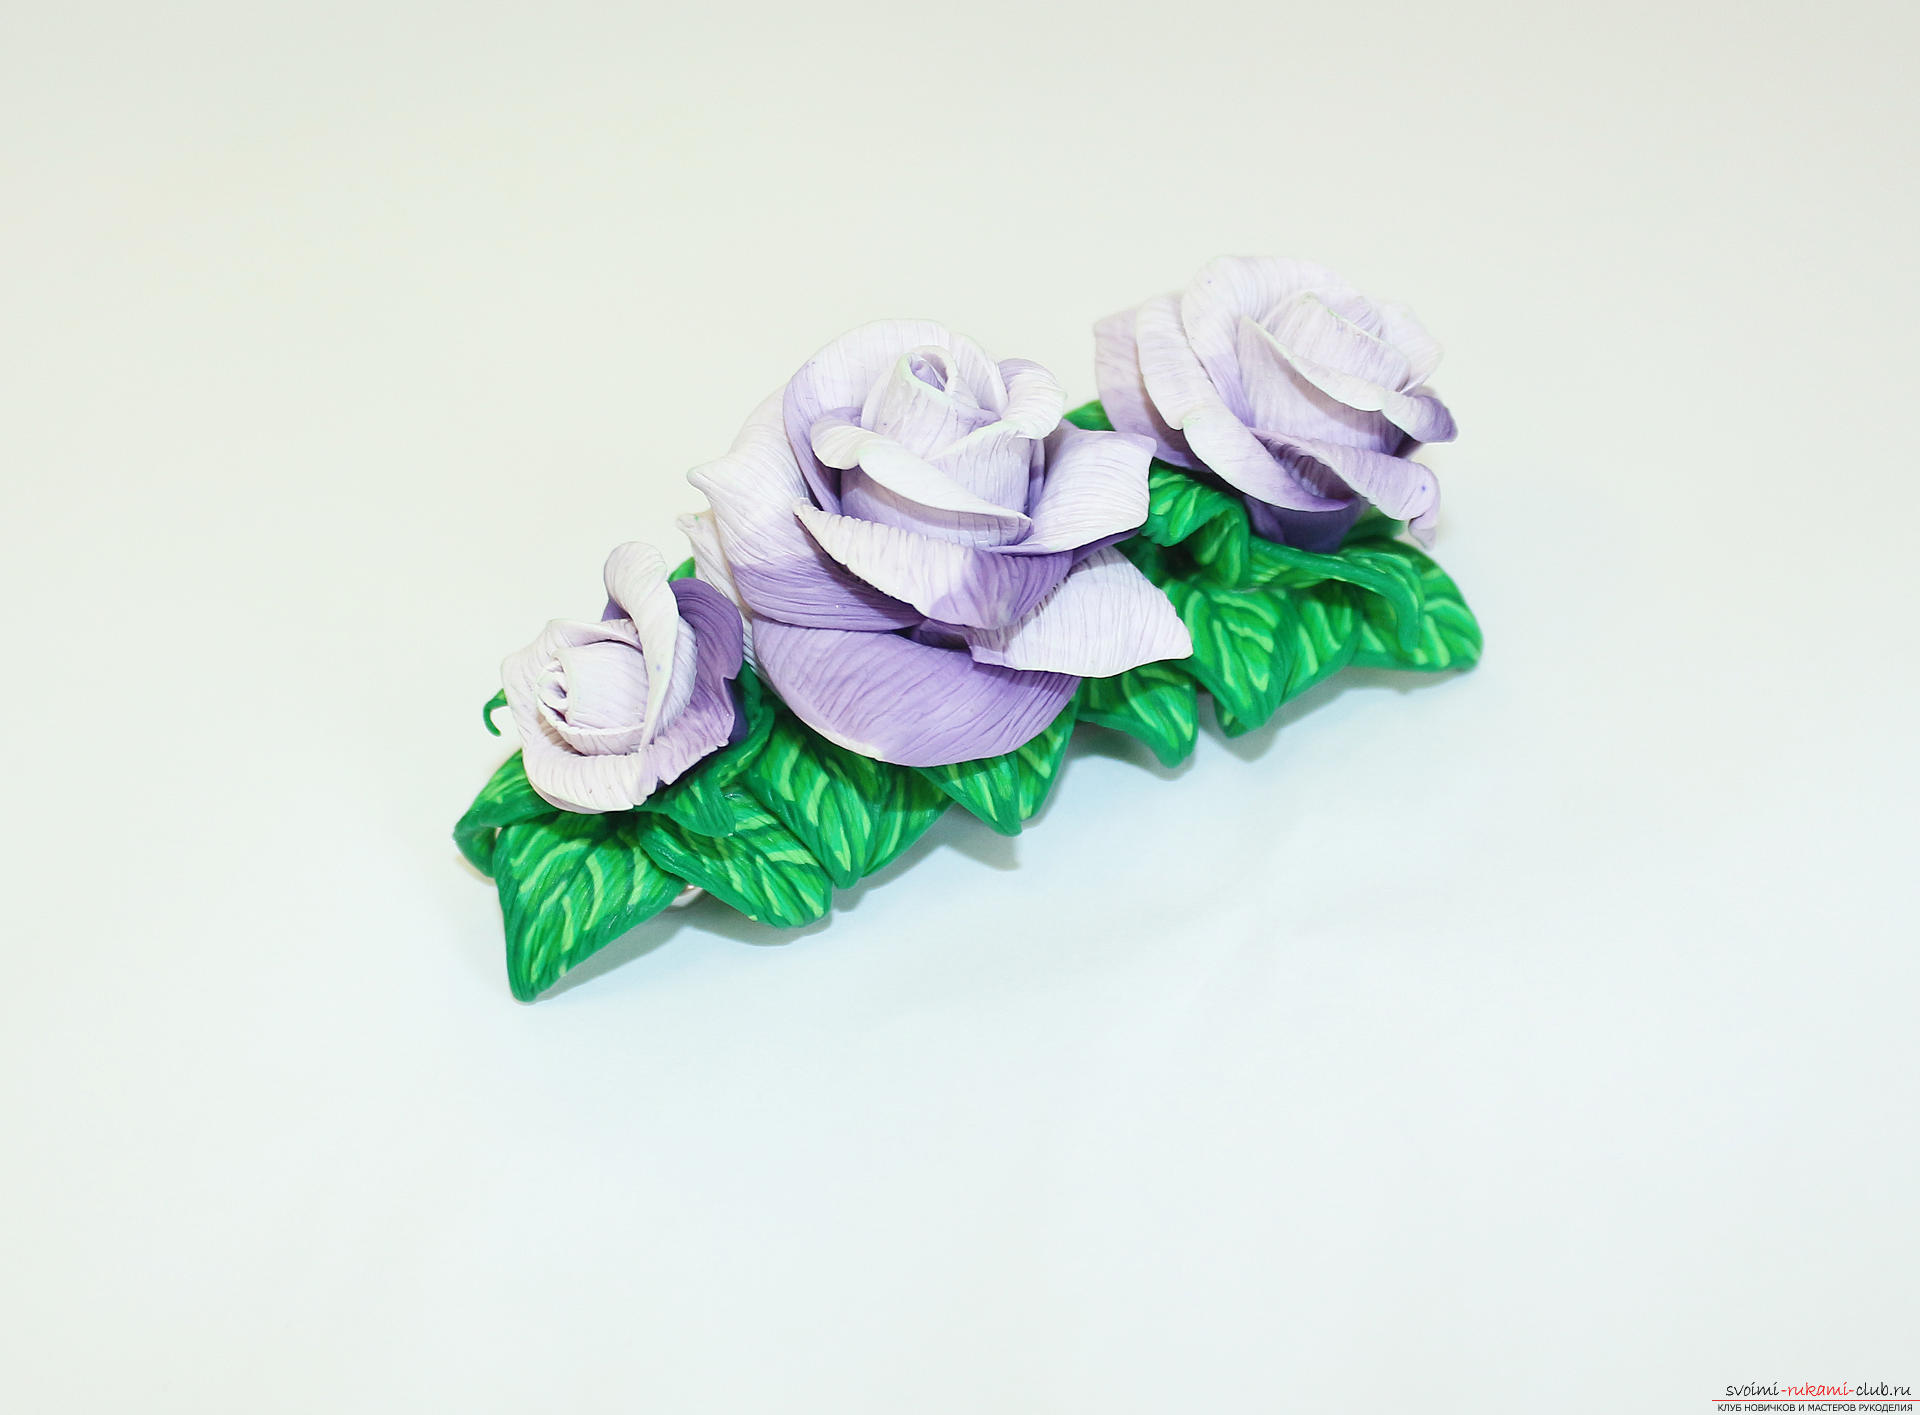 This master class with a photo and description will teach you how to make flowers - roses - from polymer clay in the texturing technique. Photo # 83